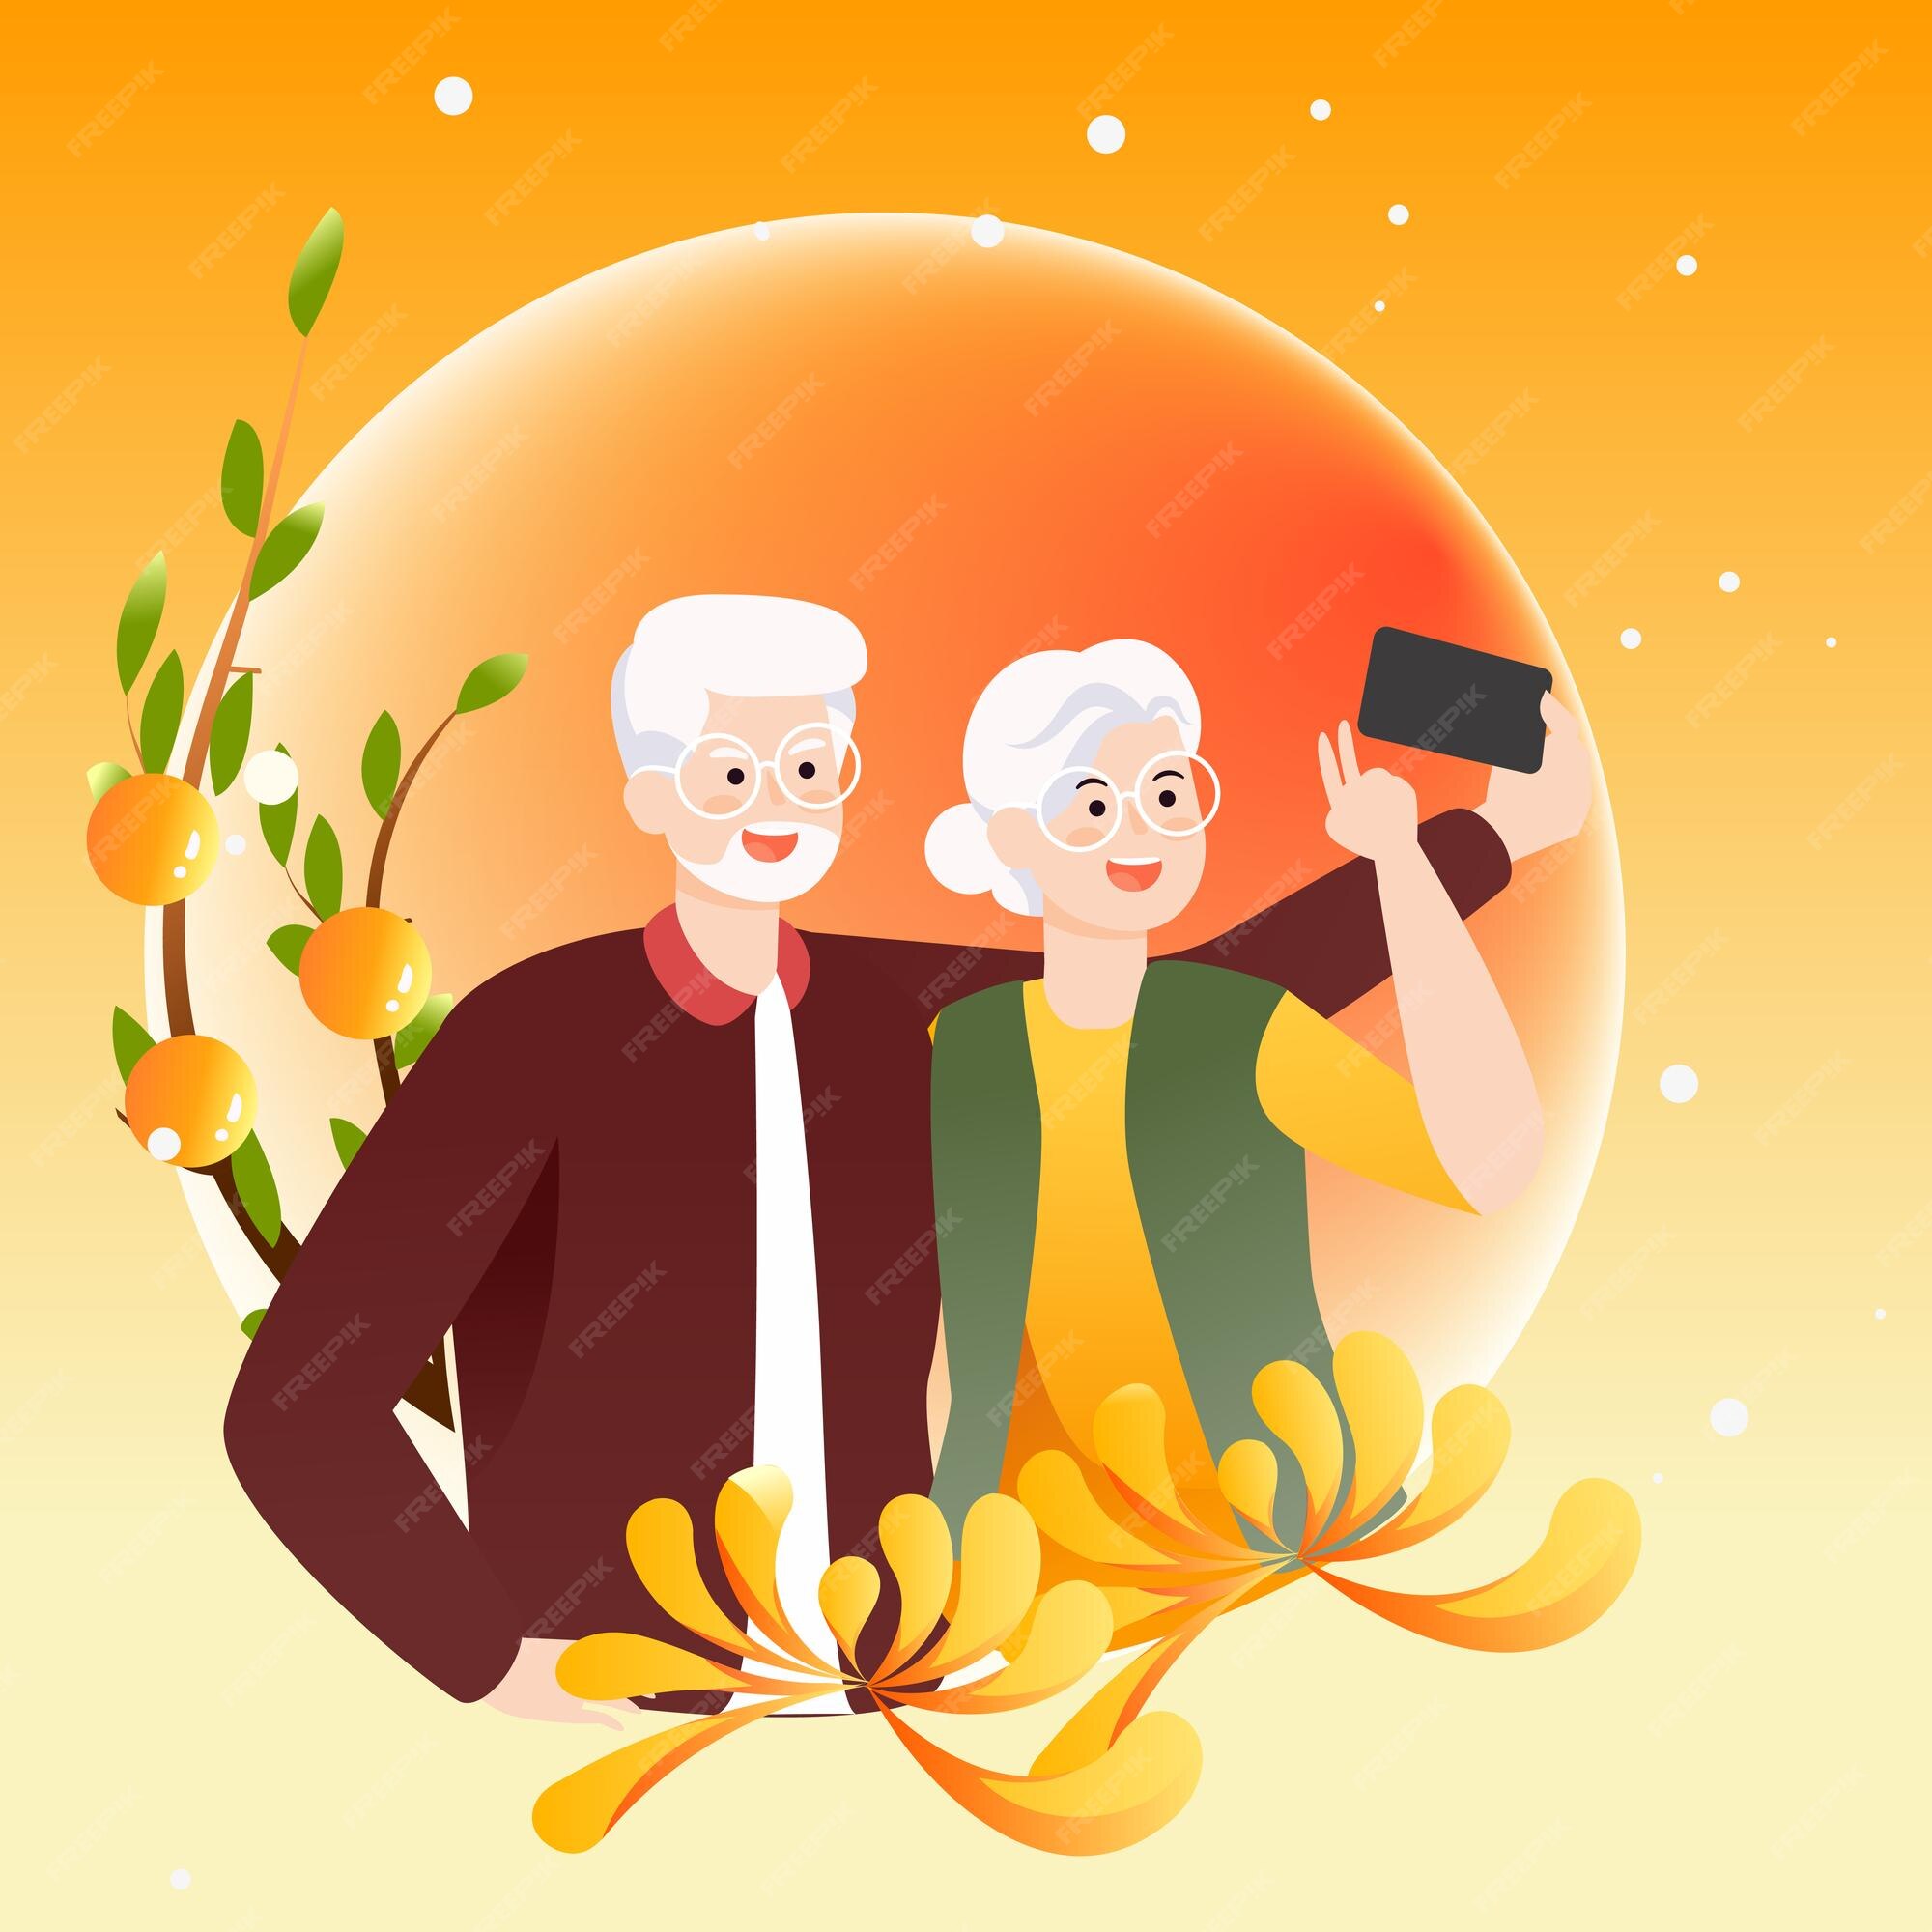 Premium Vector | Double ninth festival, elderly couple climbing mountains  with chrysanthemums and mountains